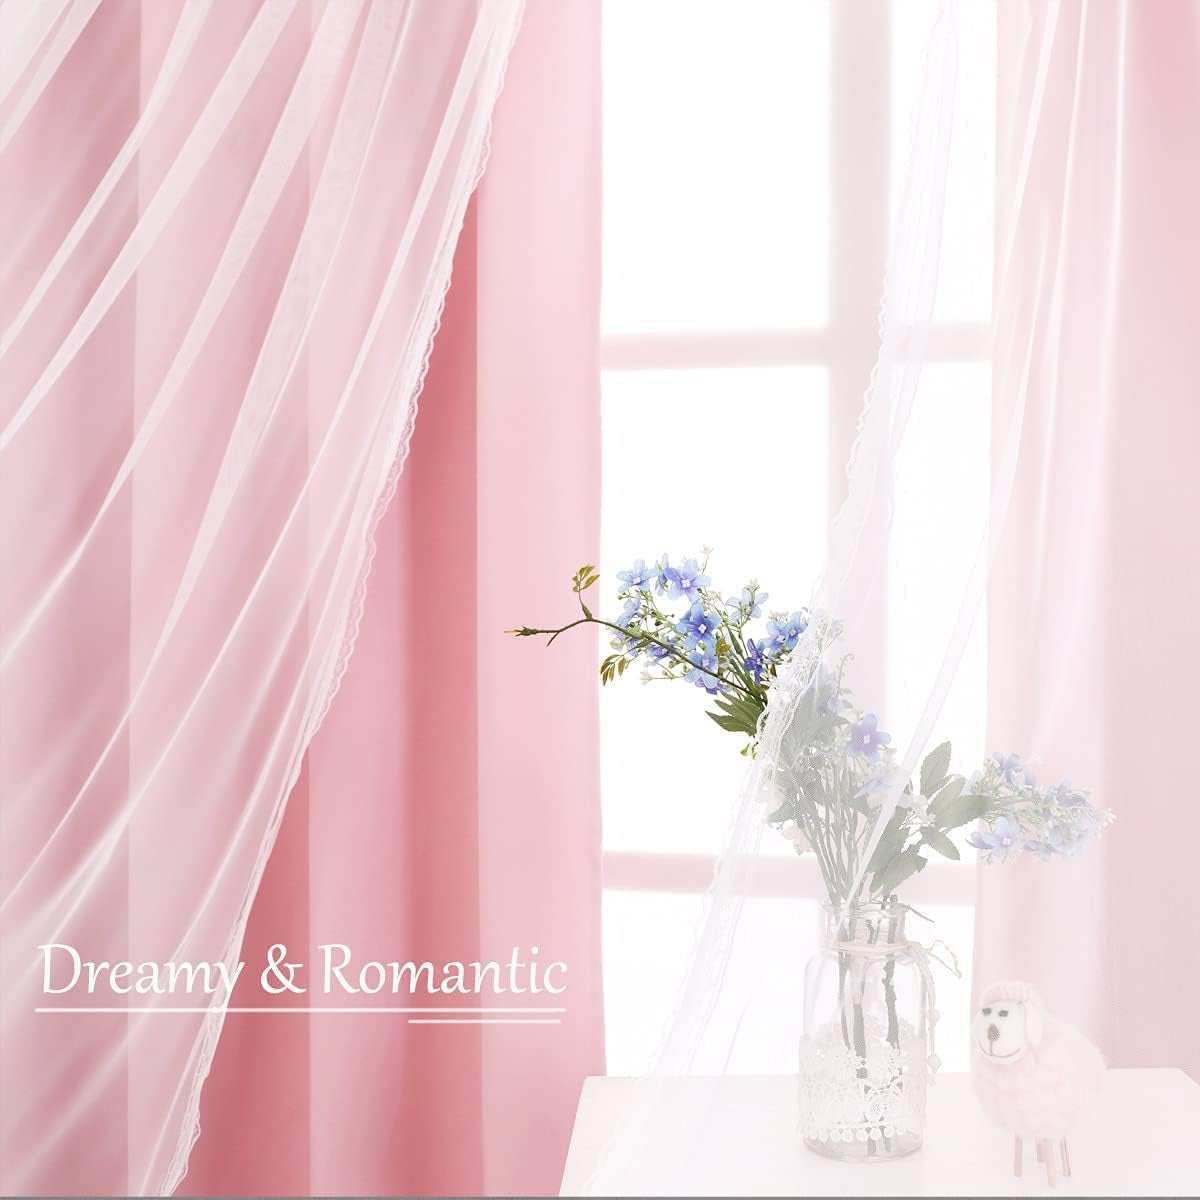 Pink Blackout Curtains 84 Inch Length - Double Layers Princess Girls Curtains & Draperies Panels for Kids Bedroom Living Room Nursery Pink Lace Hem Room Darkening Curtains, 2 Pcs  SOFJAGETQ   